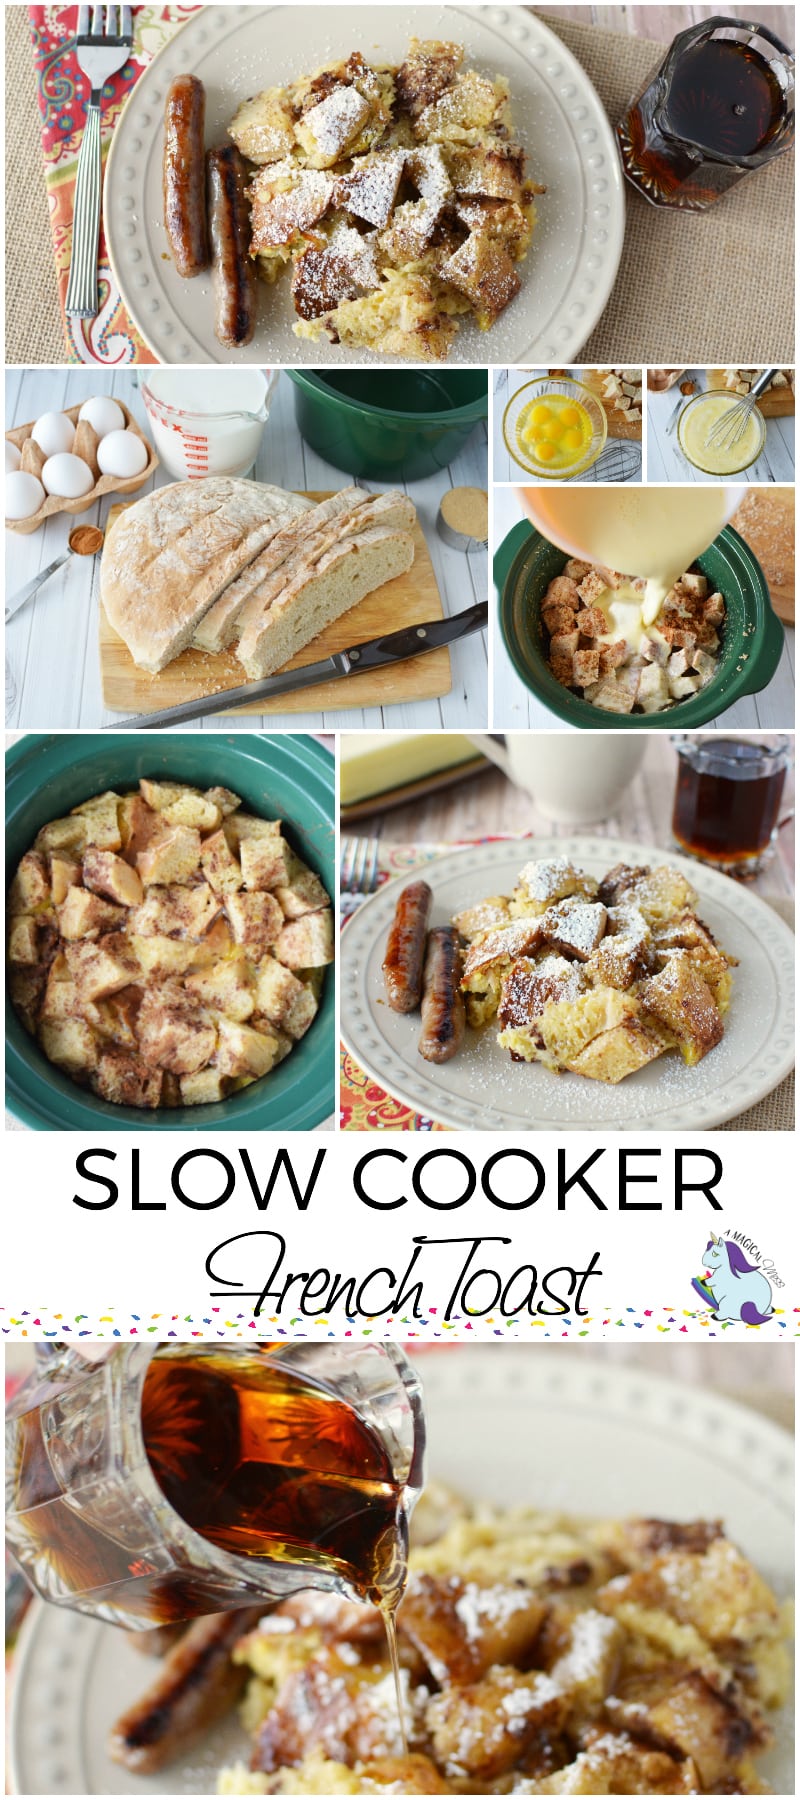 Overnight Slow Cooker French Toast